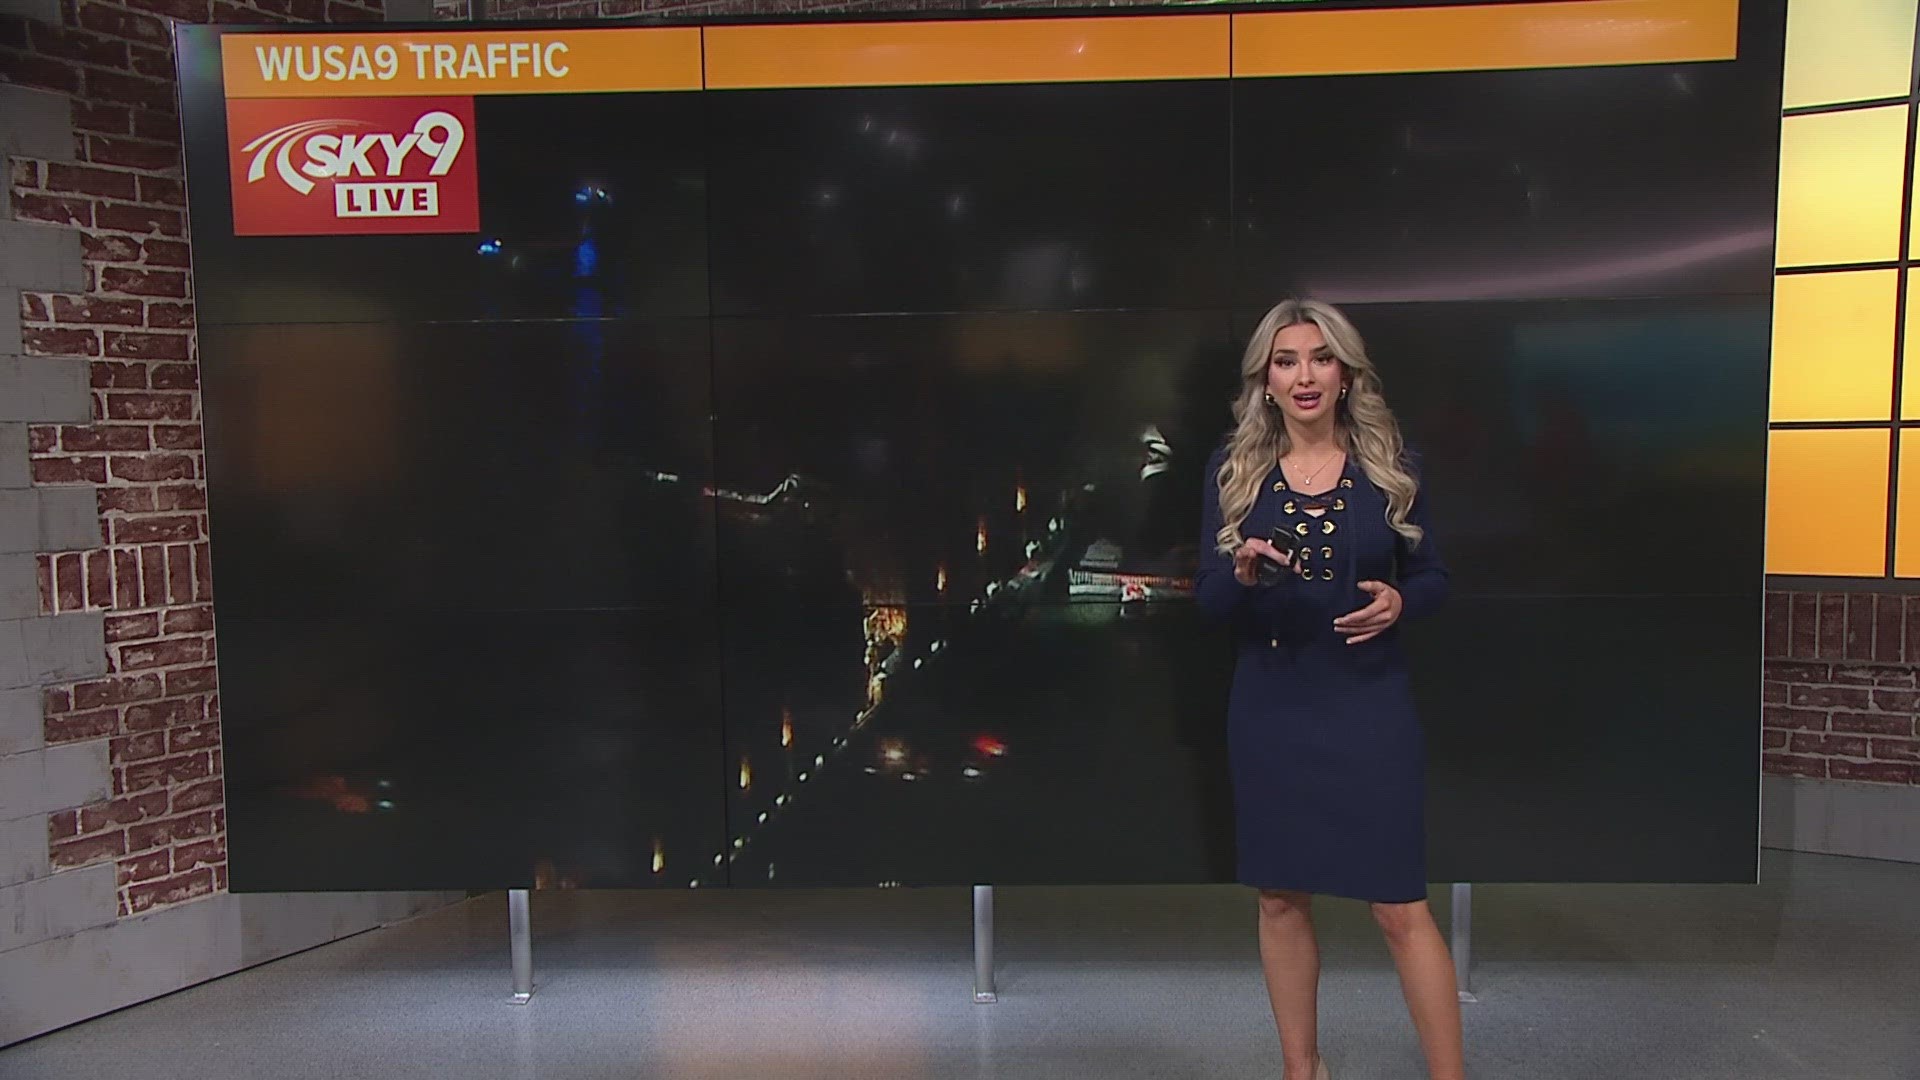 Here's a look of traffic impacts due to the Key Bridge collapse in Baltimore.